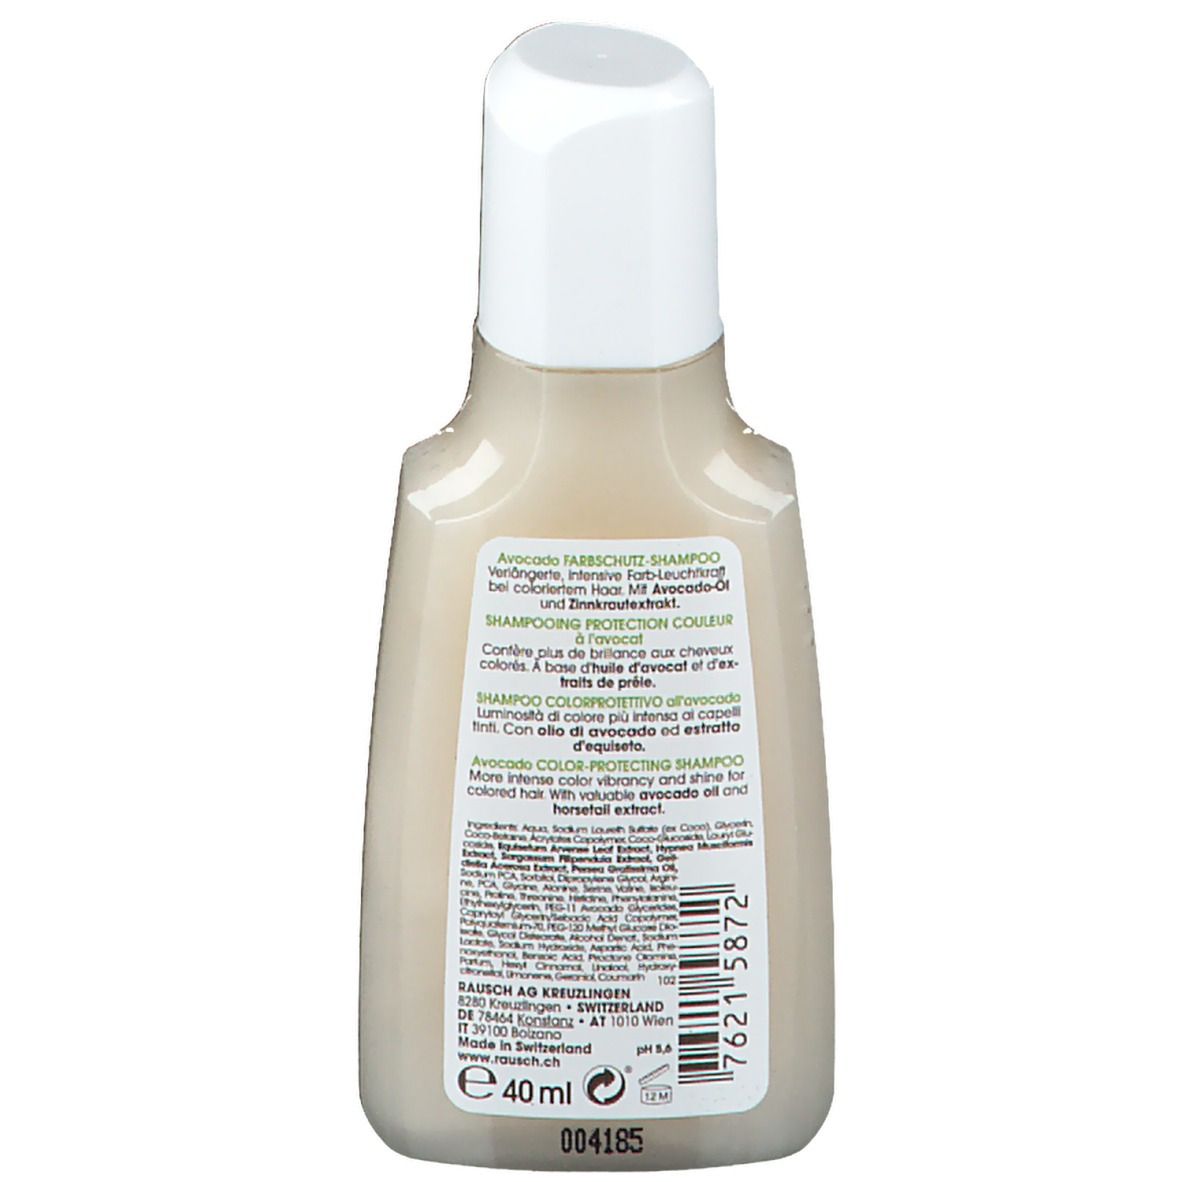 RAUSCH Avocat Shampooing Protection de coloration